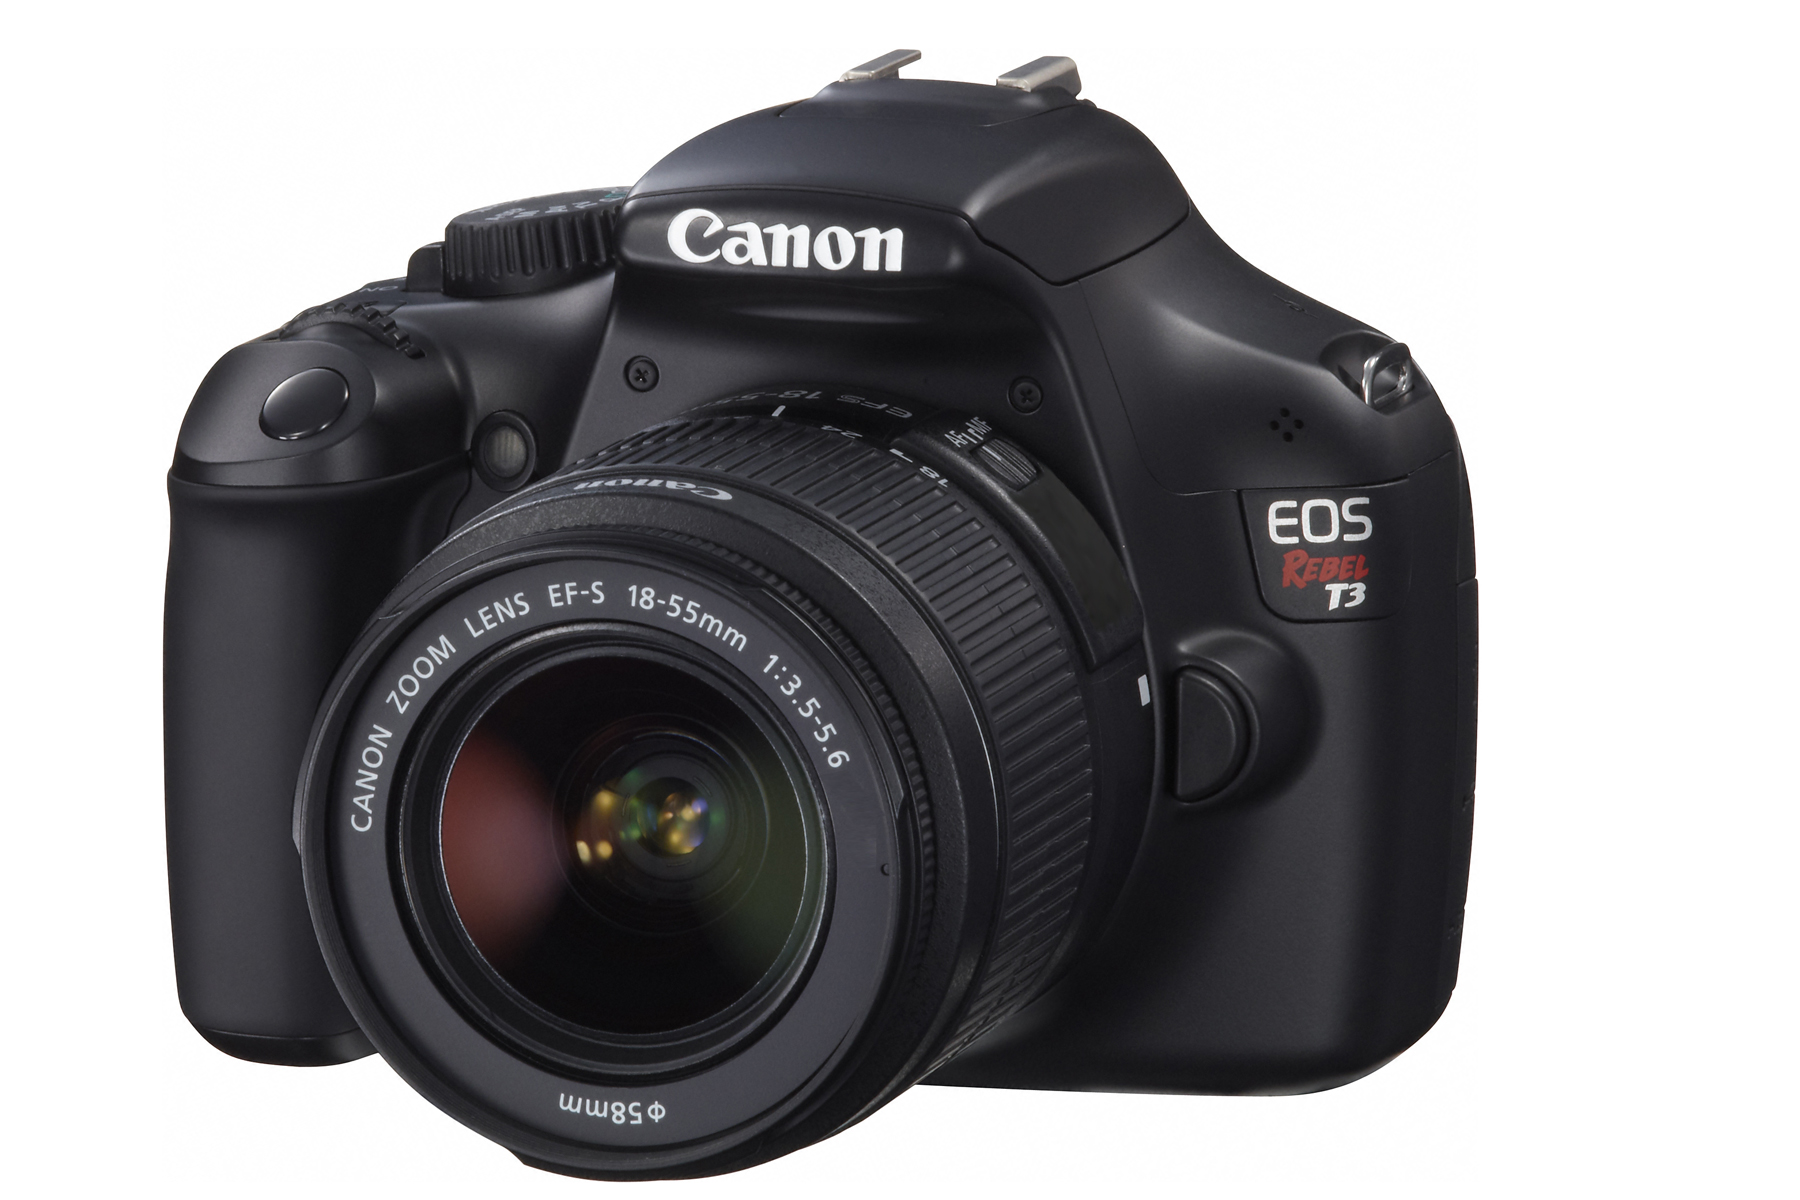 Canon 12.2 Megapixel EOS Rebel T3 Digital SLR Camera with 18 55mm Lens - CANON INC/TOKYO VIDEO DIVISION